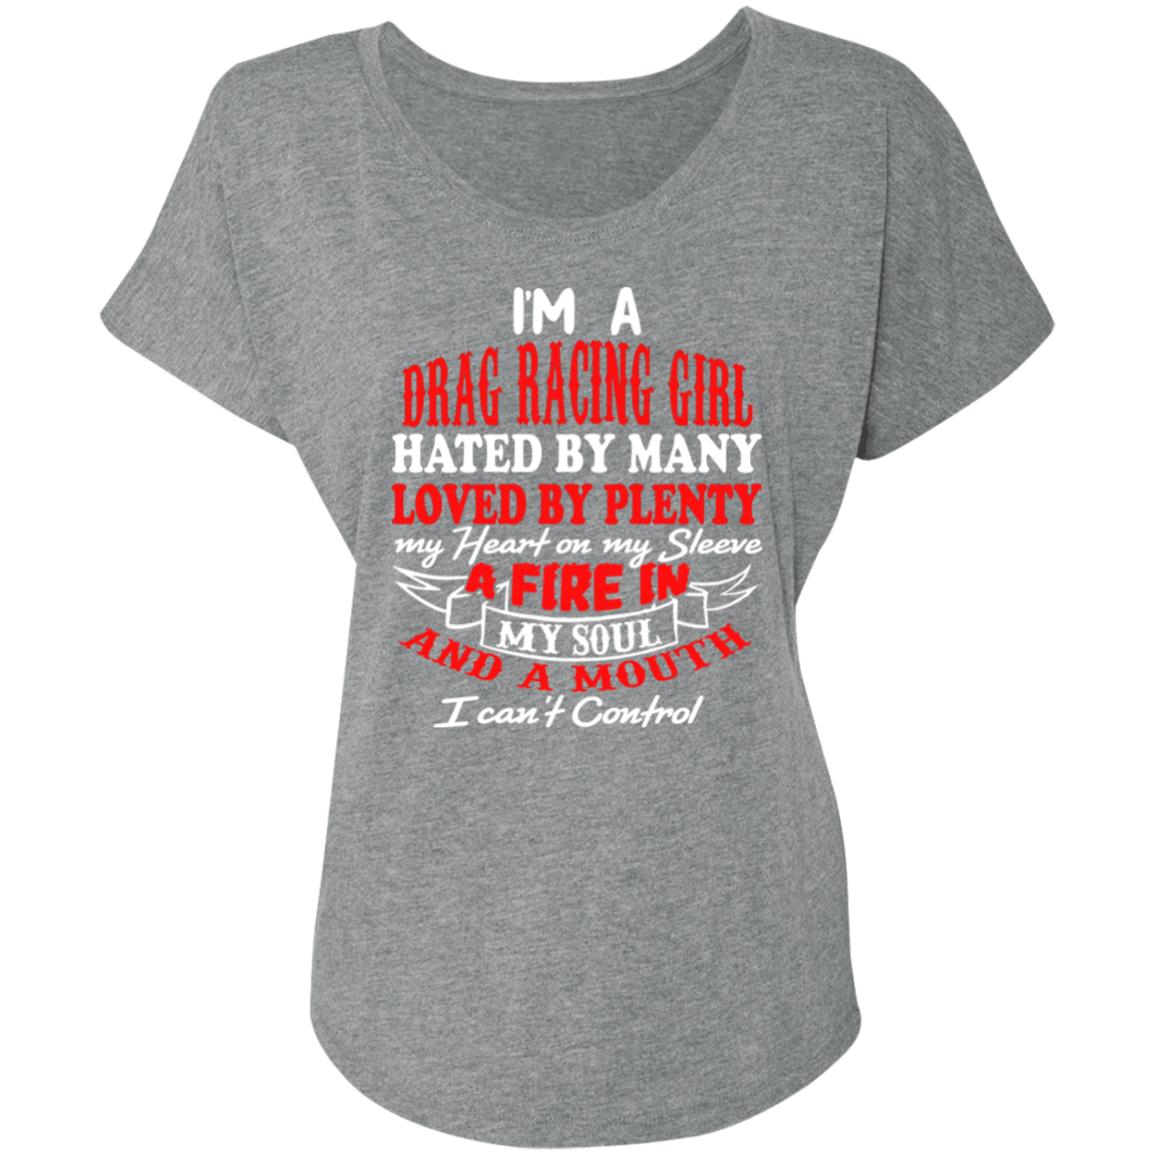 I'm A Drag Racing Girl Hated By Many Loved By Plenty Ladies' Triblend Dolman Sleeve